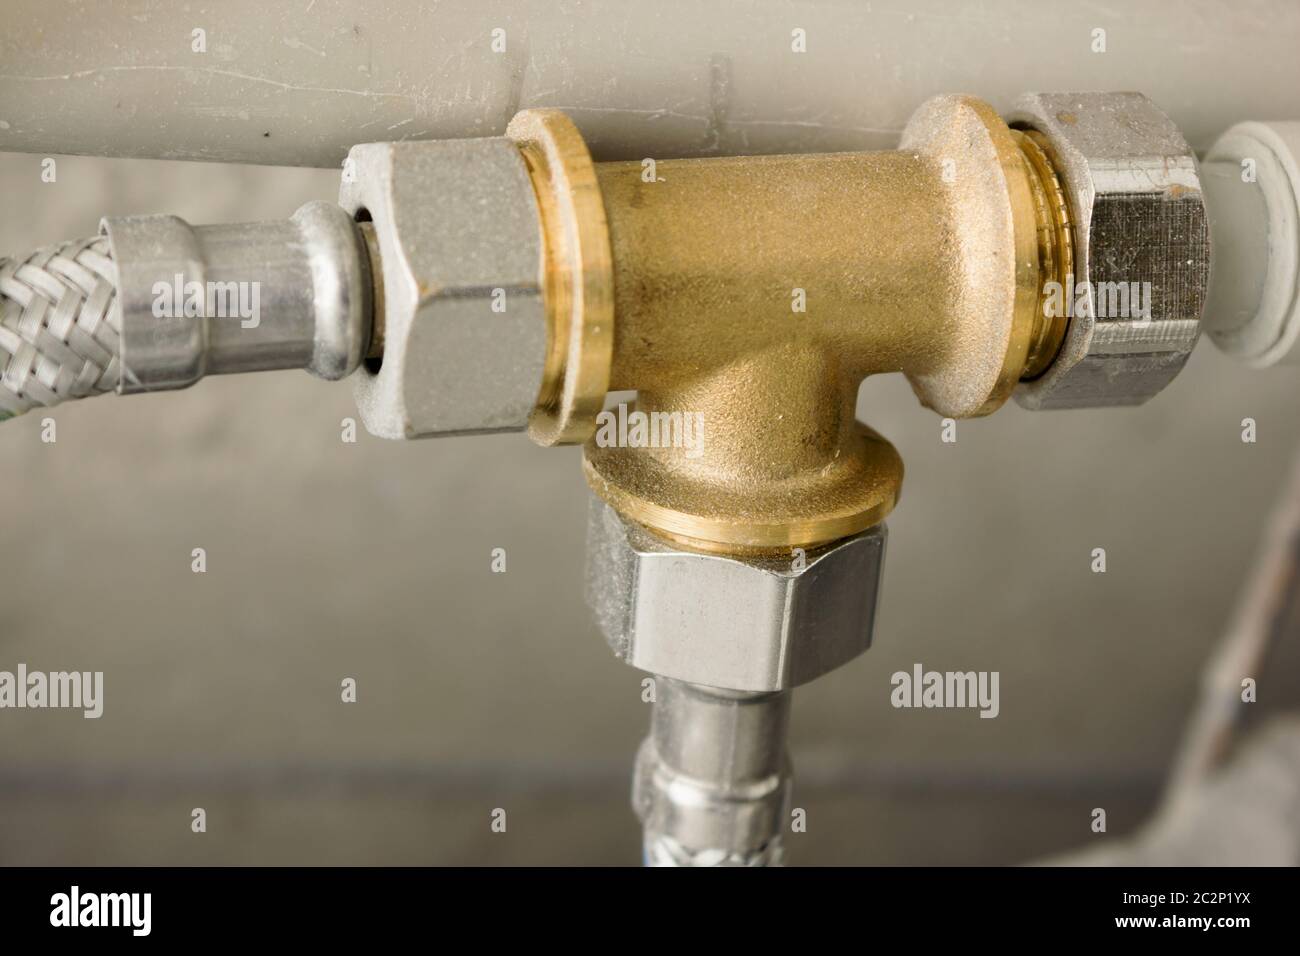 Brass part in water supply system Stock Photo